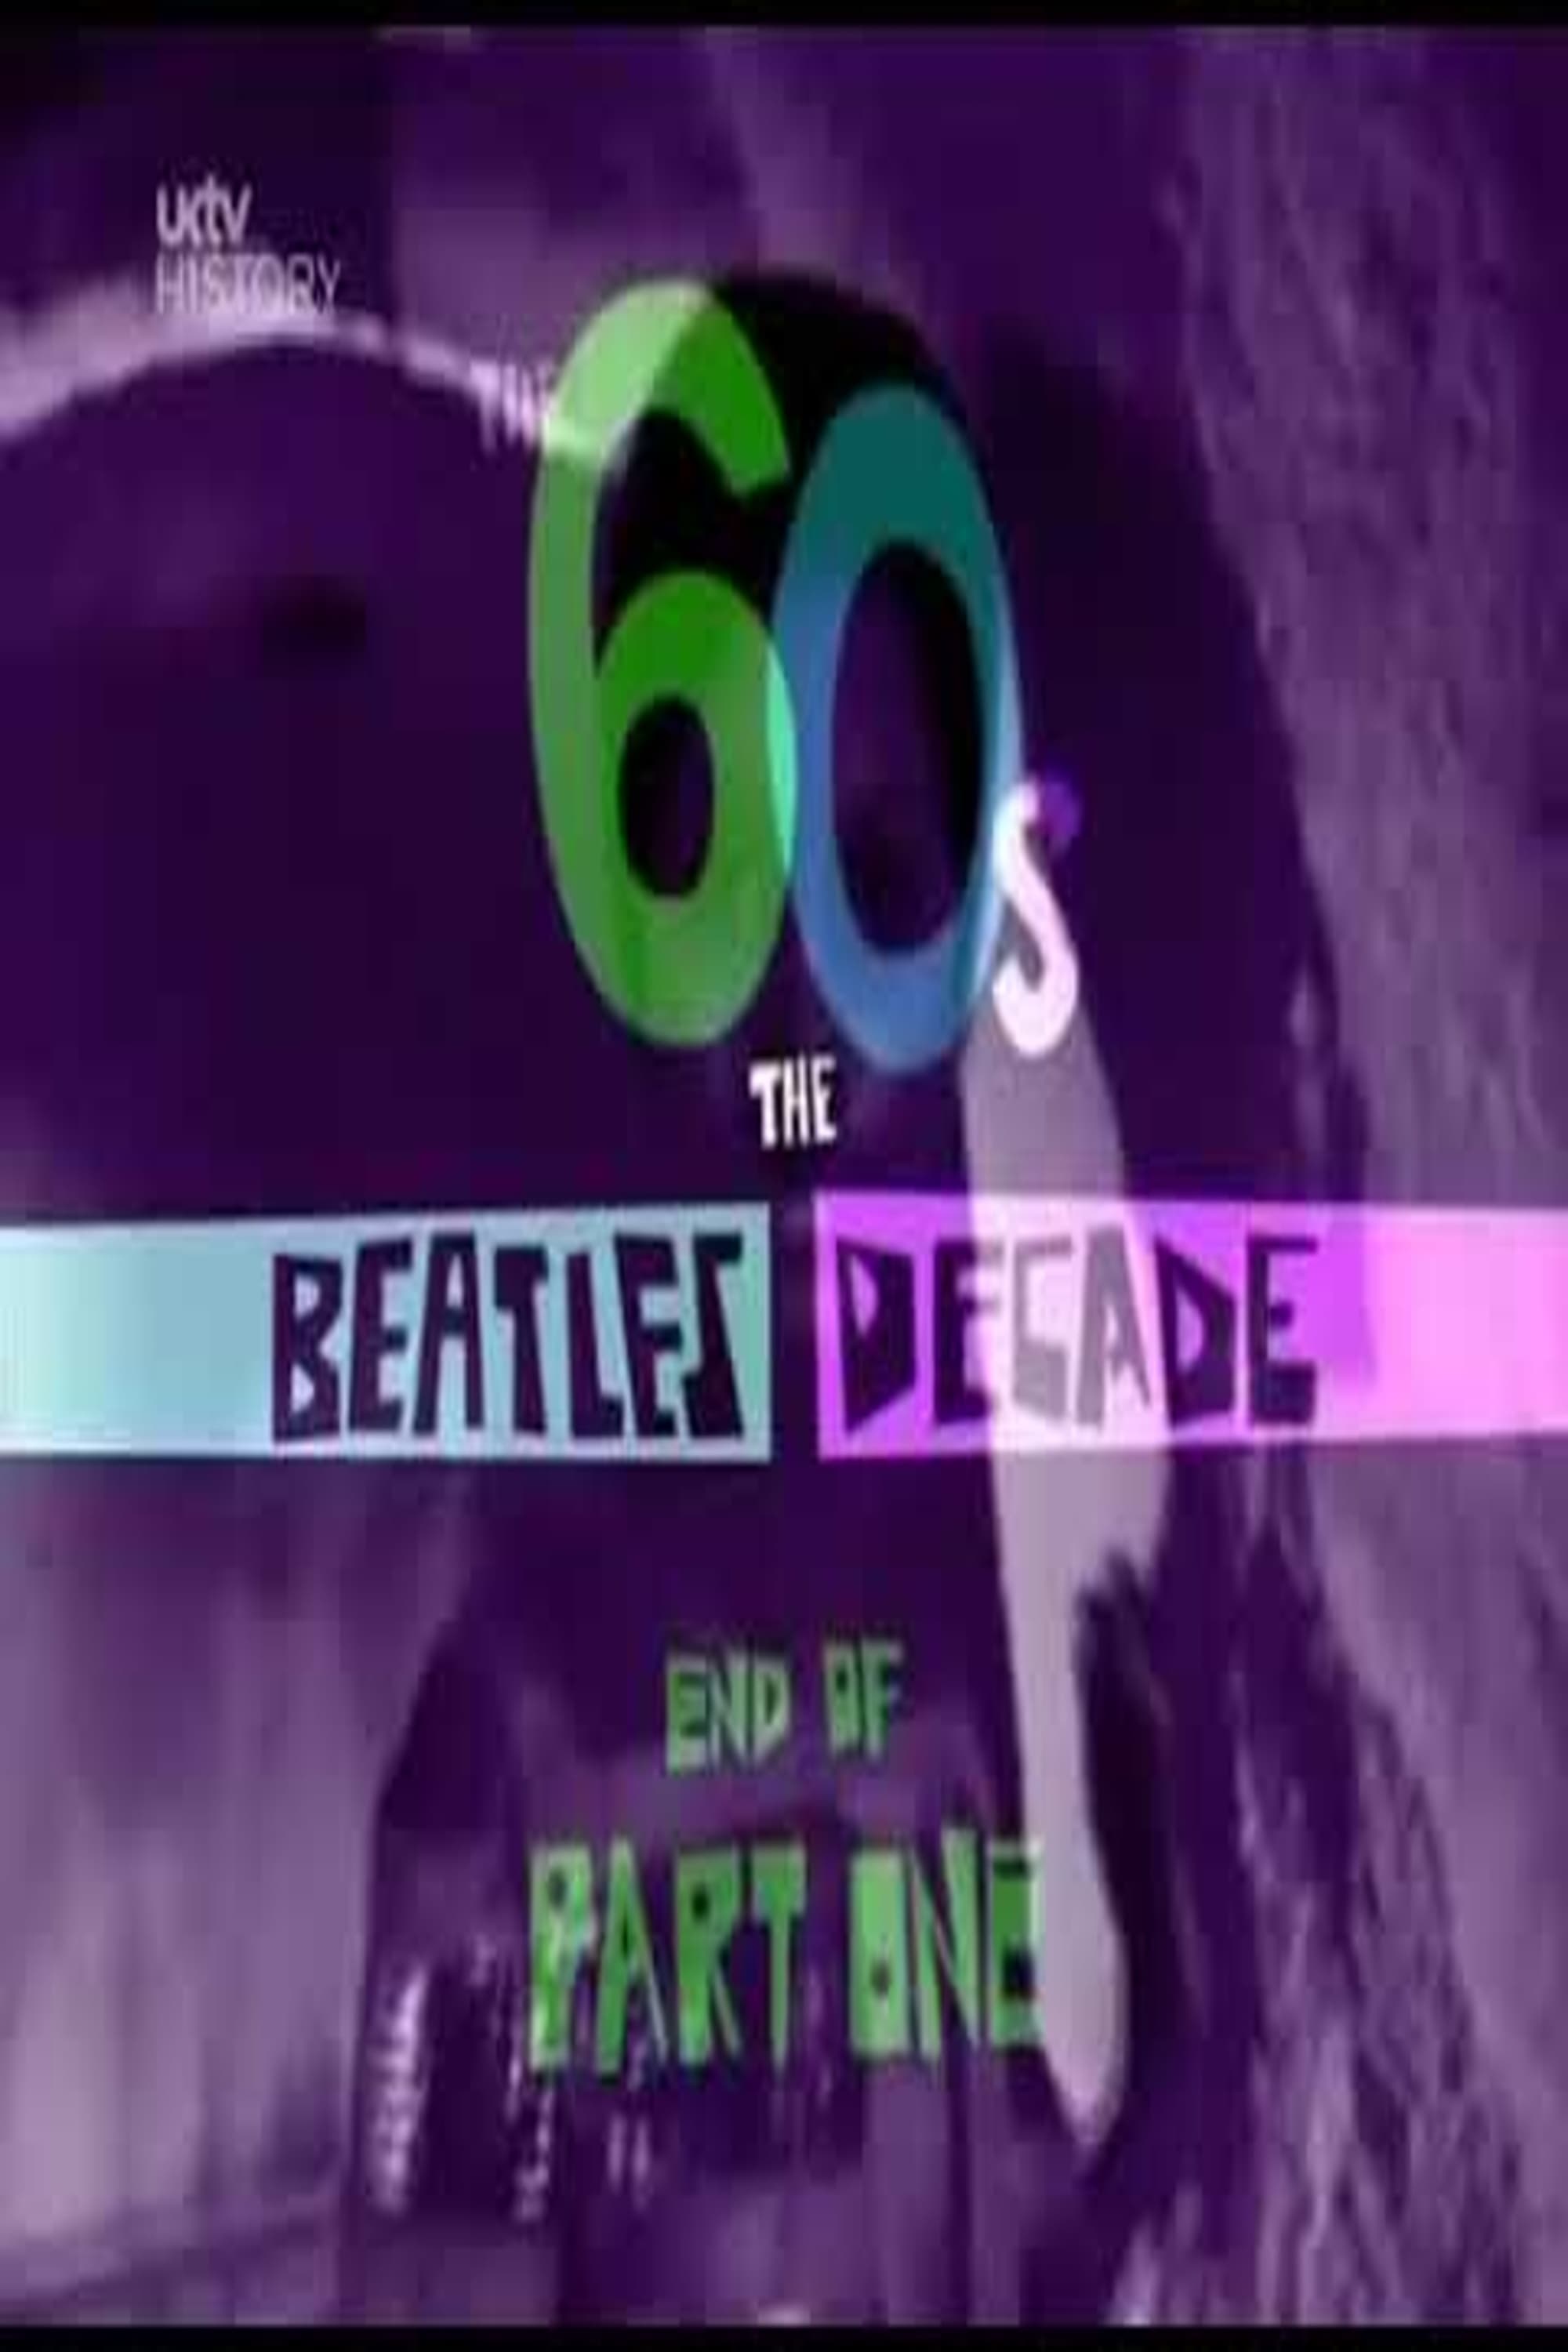 The 60s: The Beatles Decade